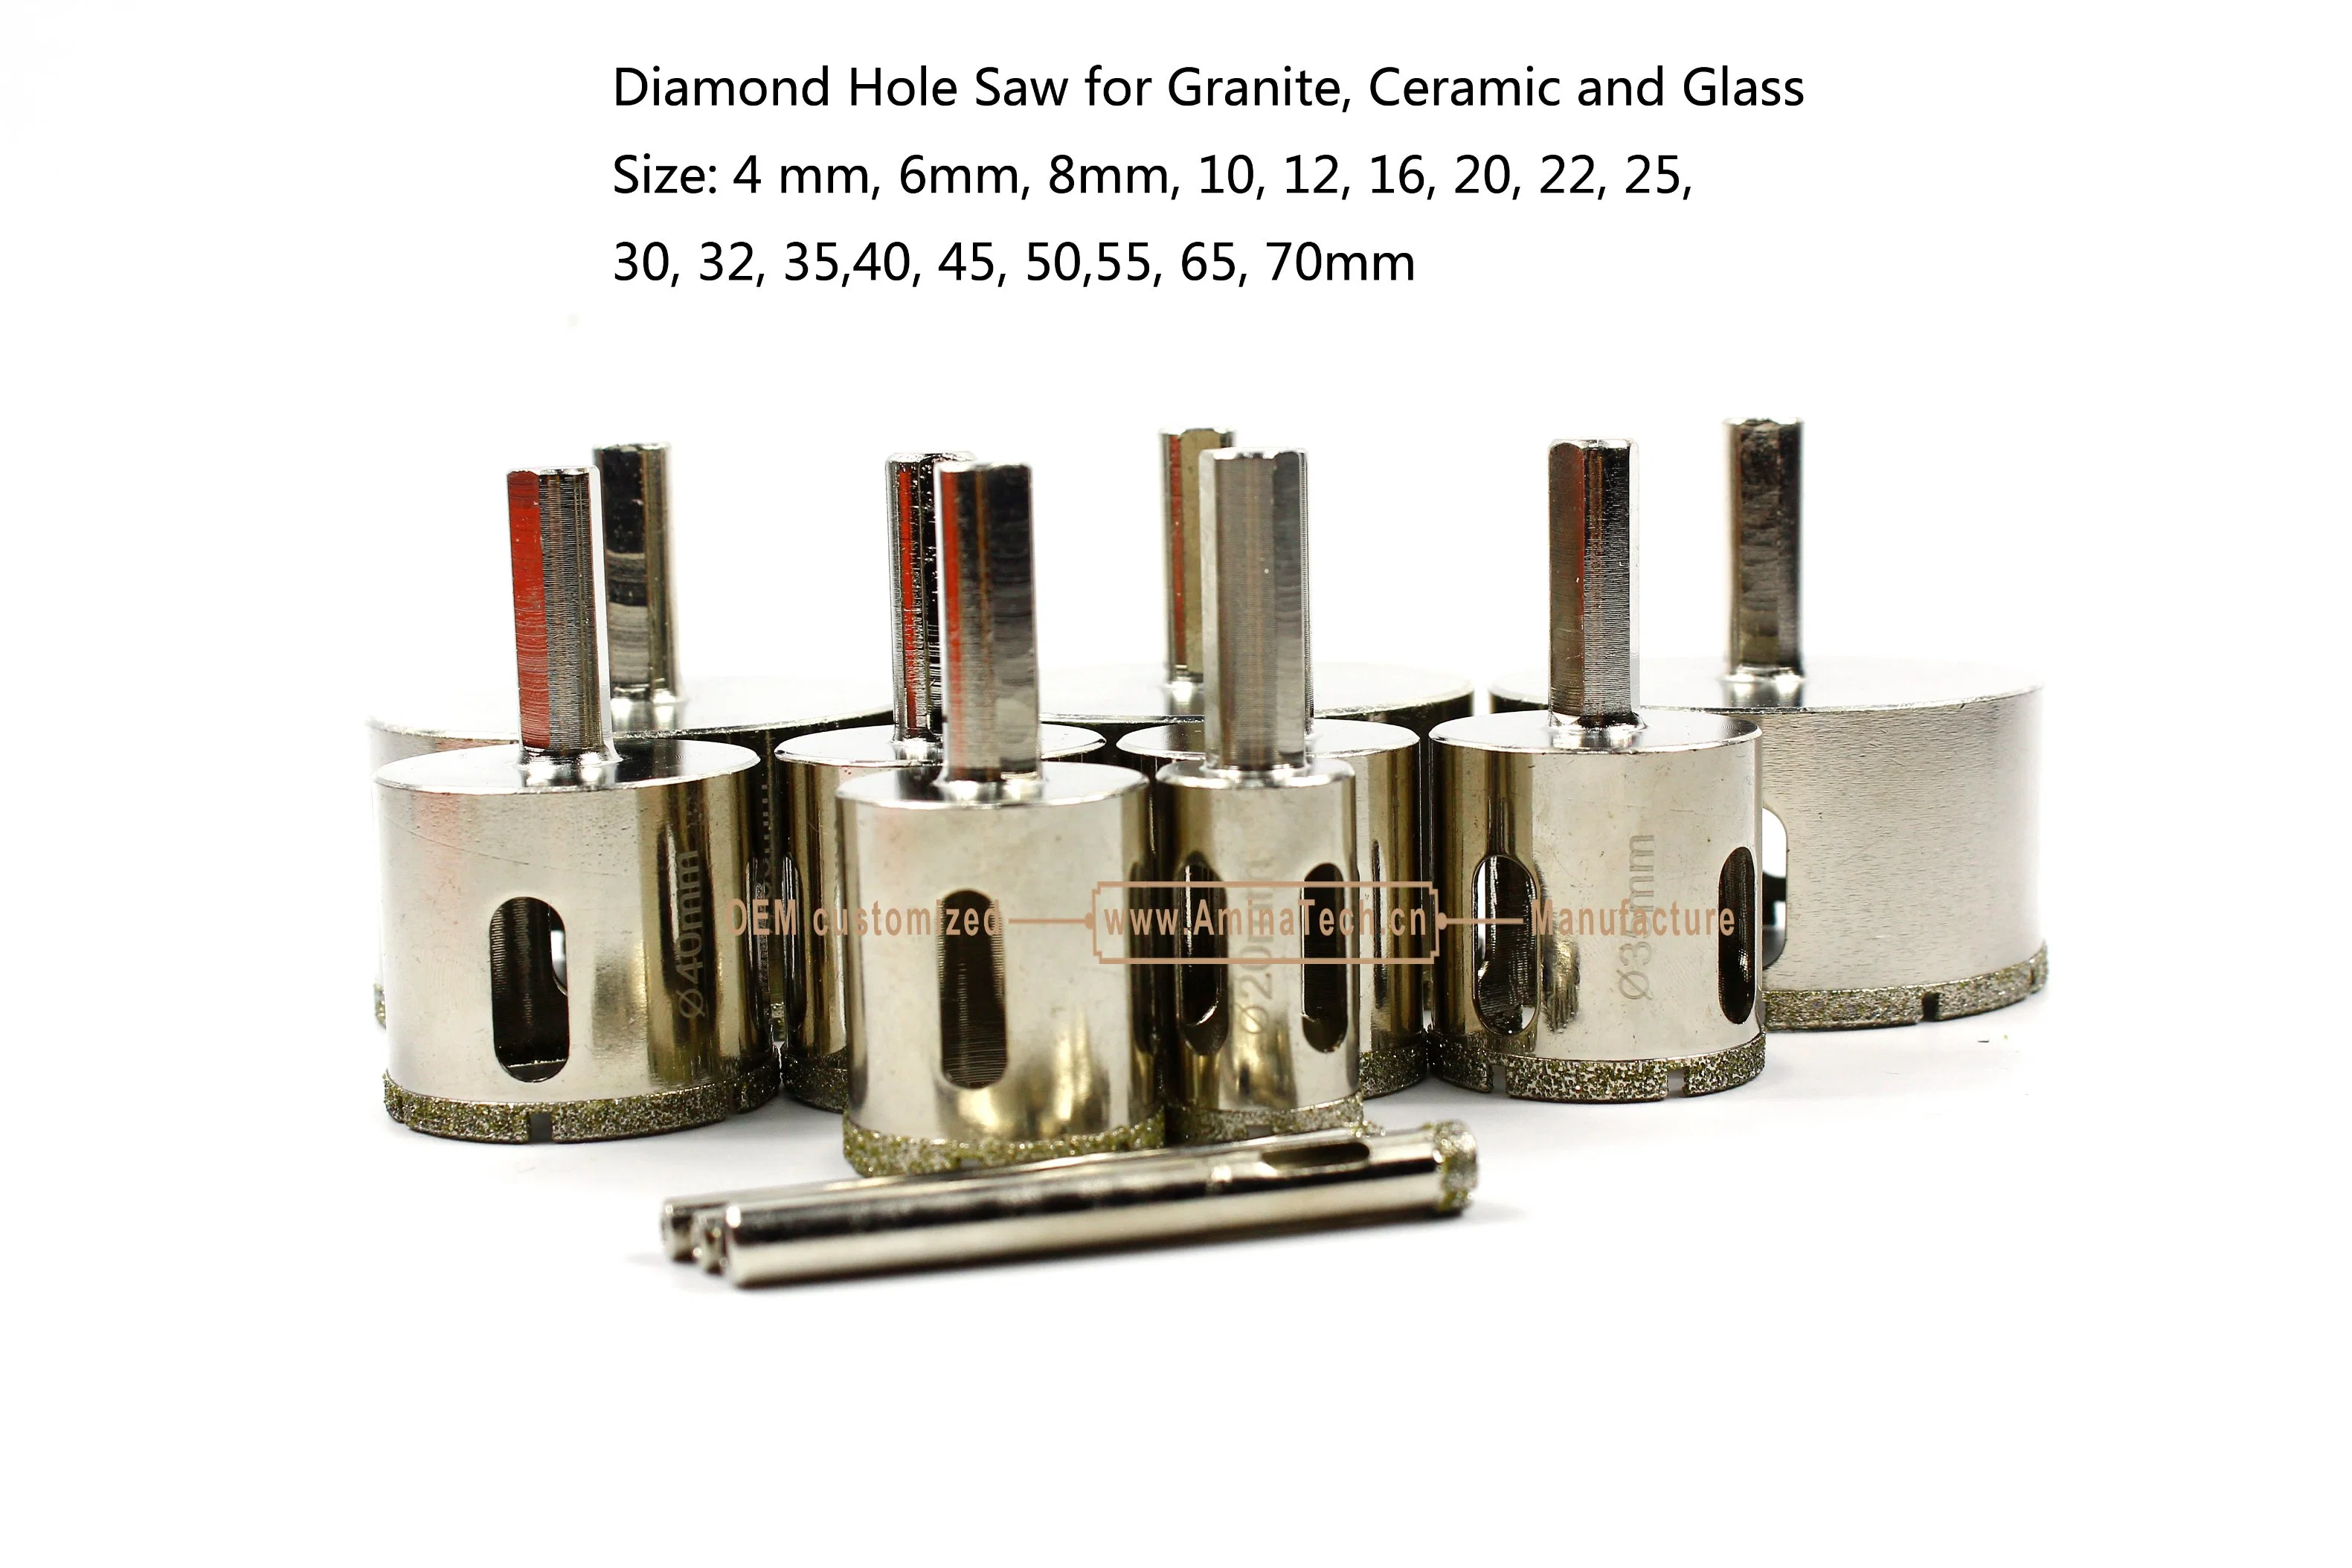 Diamond Hole Saw for Granite, glass and granite hole,Power Tools,Drill